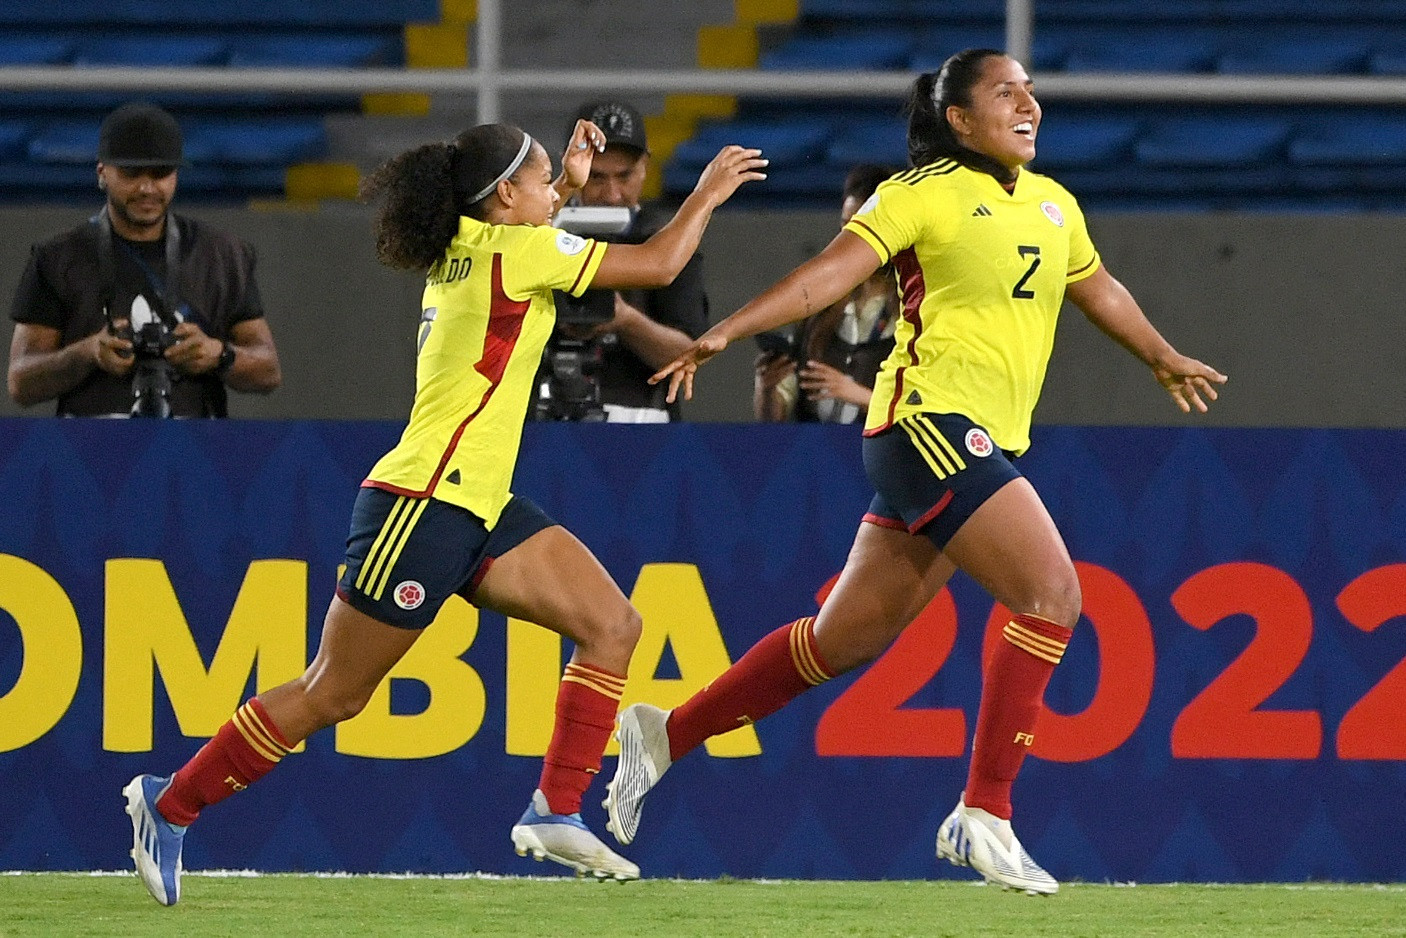 Manuela Vanegas scored Colombia's fourth goal in their opening-day victory in Cali ©Getty Images